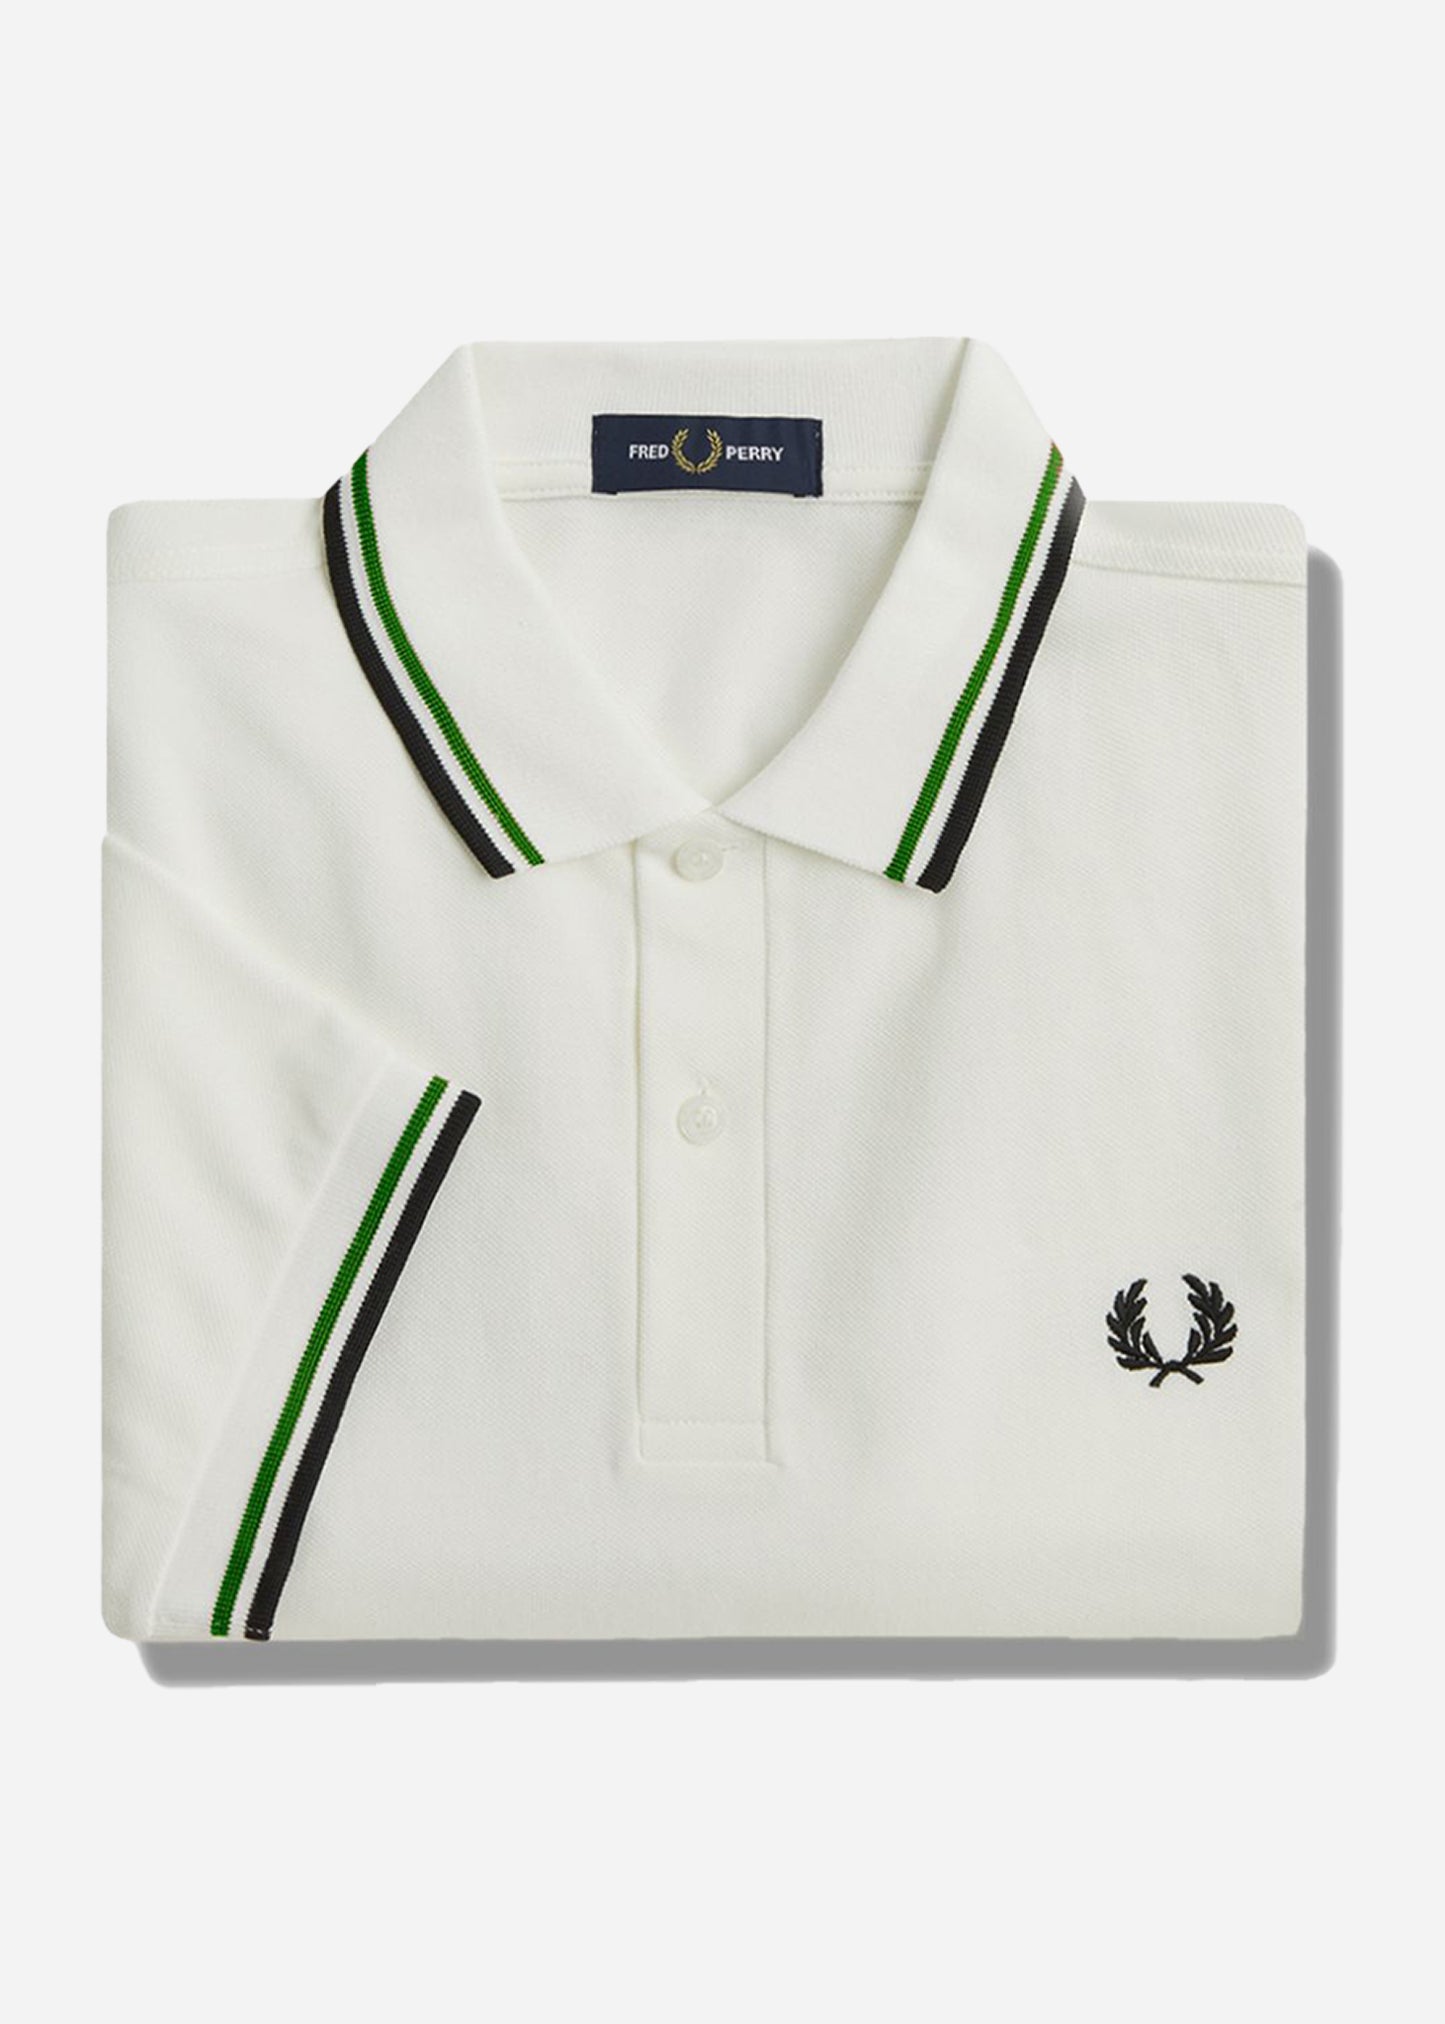 Twin tipped fred perry shirt - ecru fp green navy